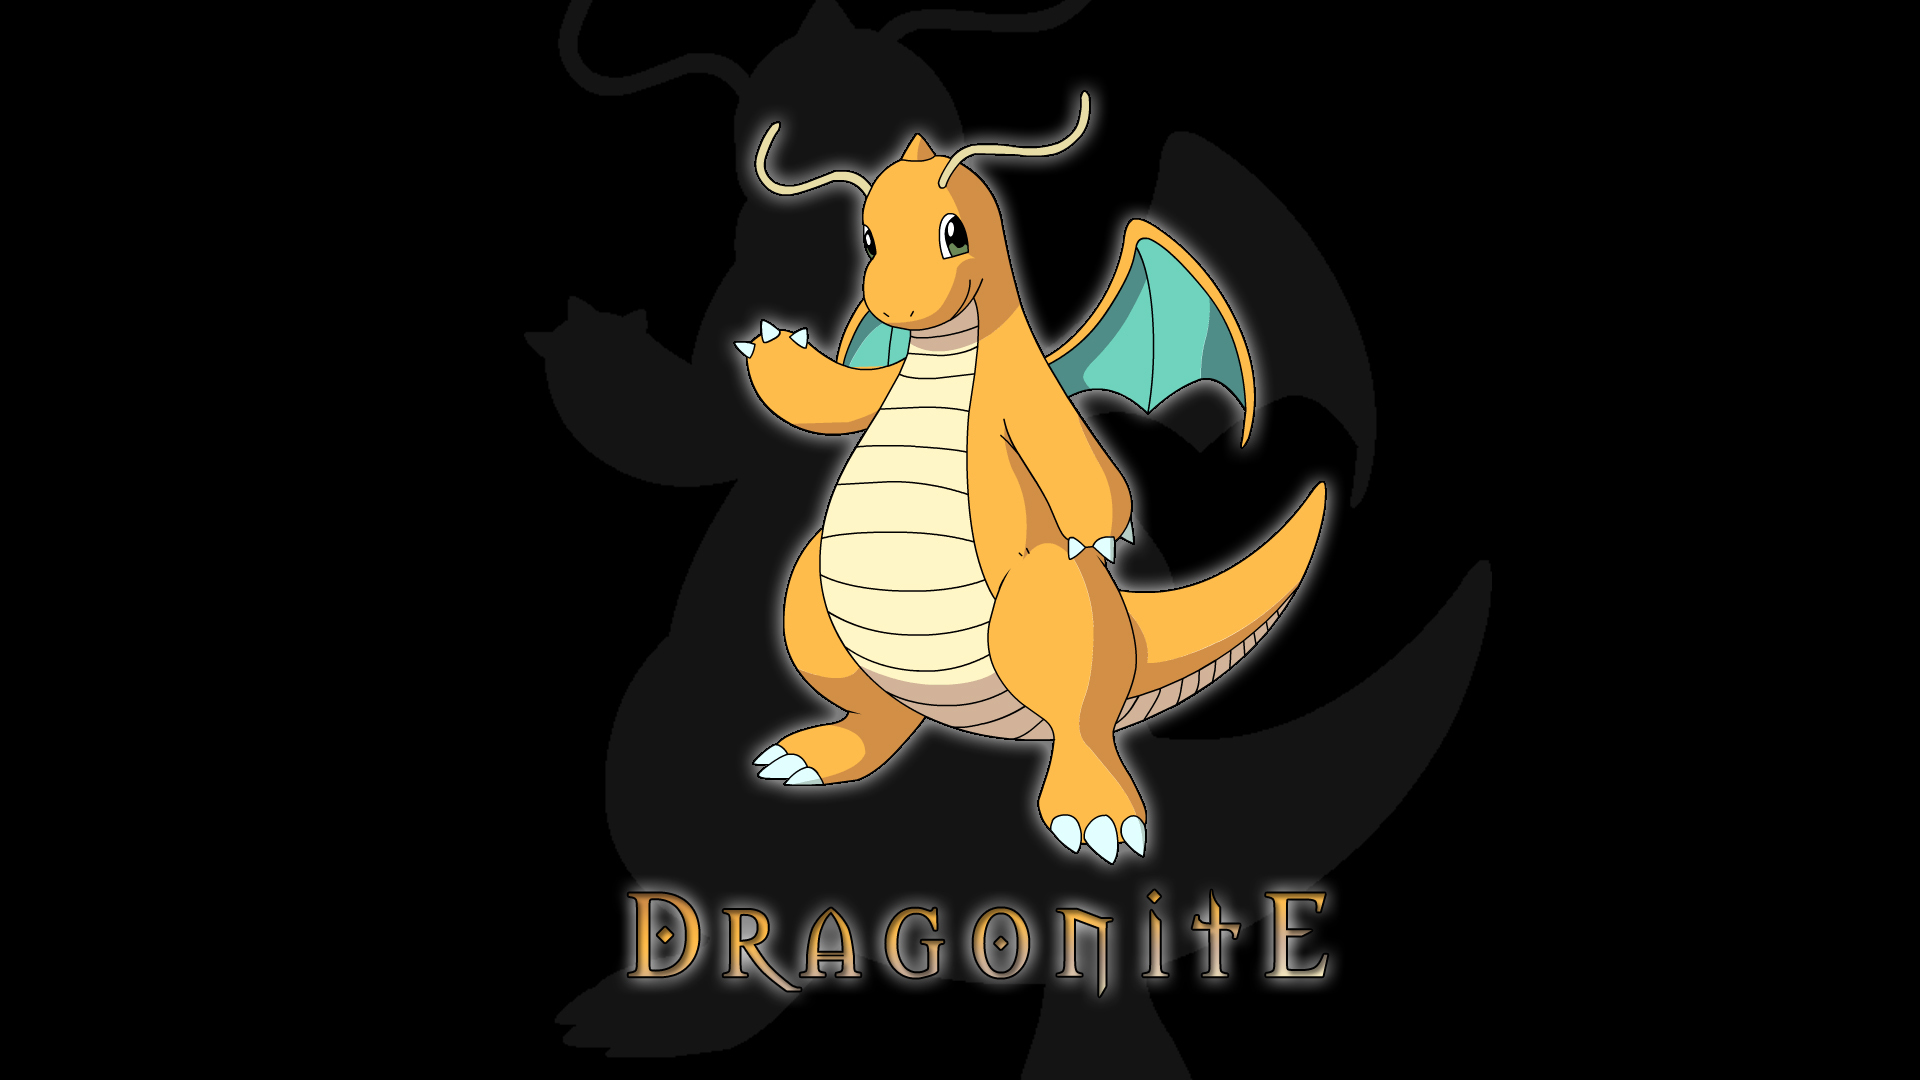 thoughts on the giant dragonite from season 1 (Indigo League) do you think  it was supposed to be as mystical as it was, or was it a Lugia substitute,  do you thing